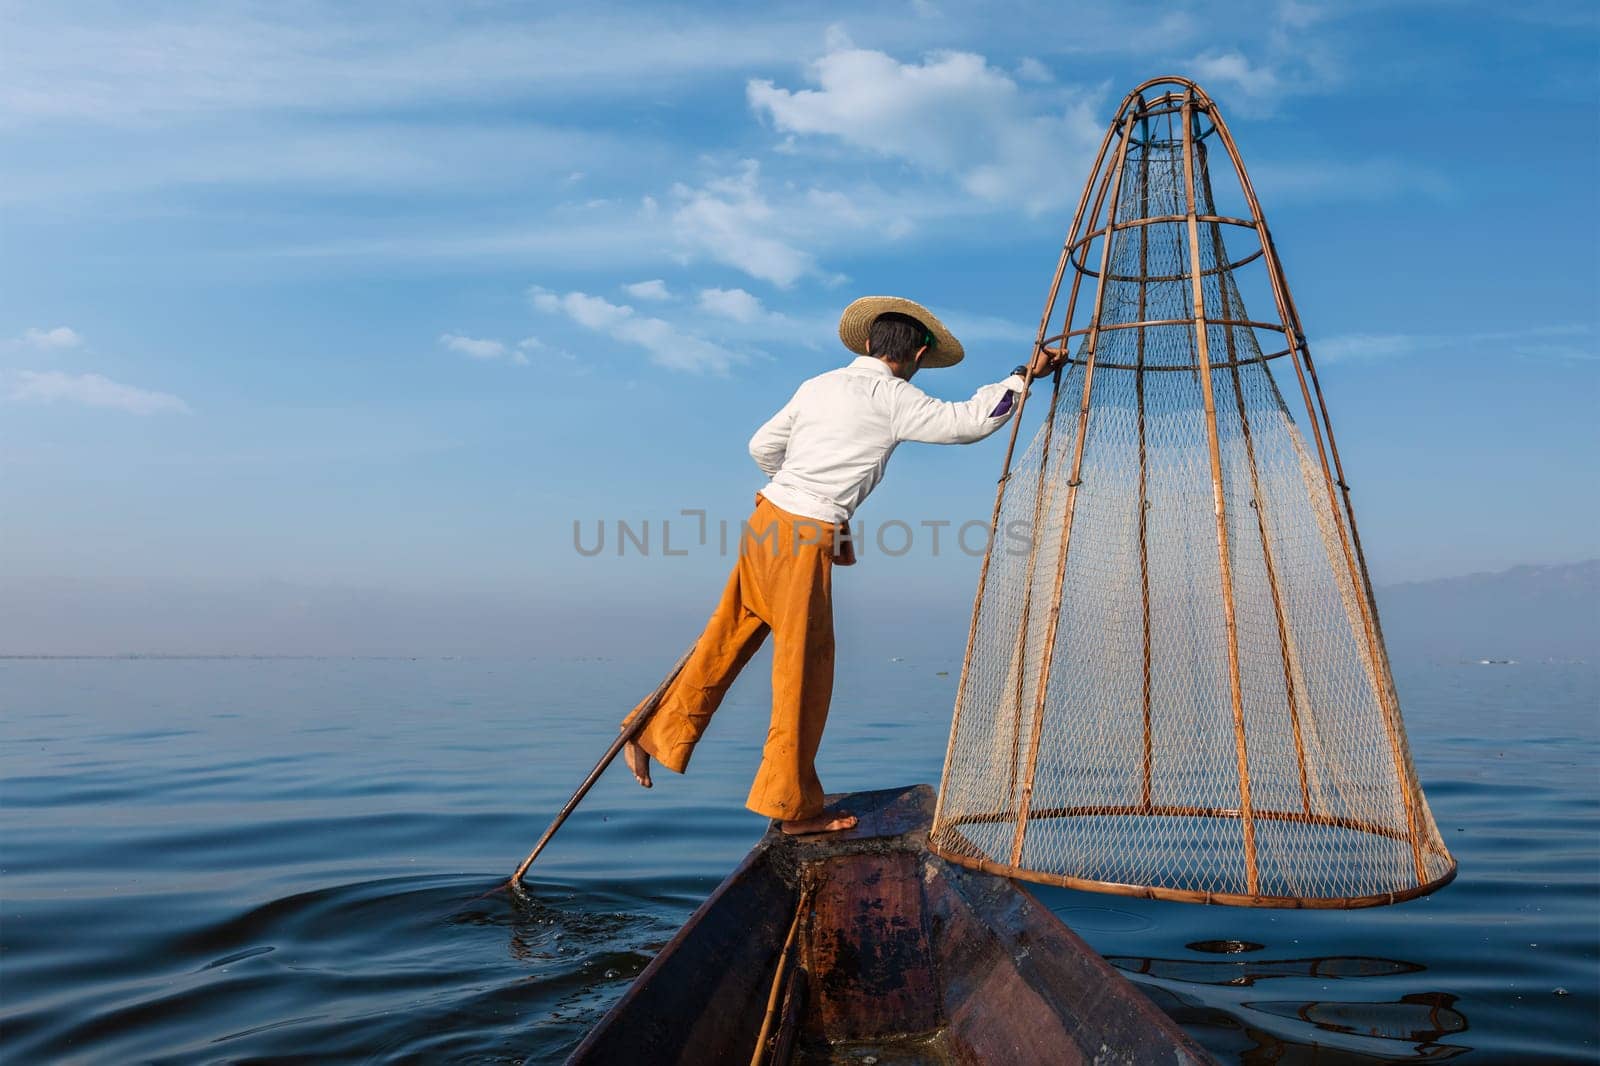 Myanmar travel attraction landmark - Traditional Burmese fisherman with fishing net at Inle lake in Myanmar famous for their distinctive one legged rowing style, view from boat